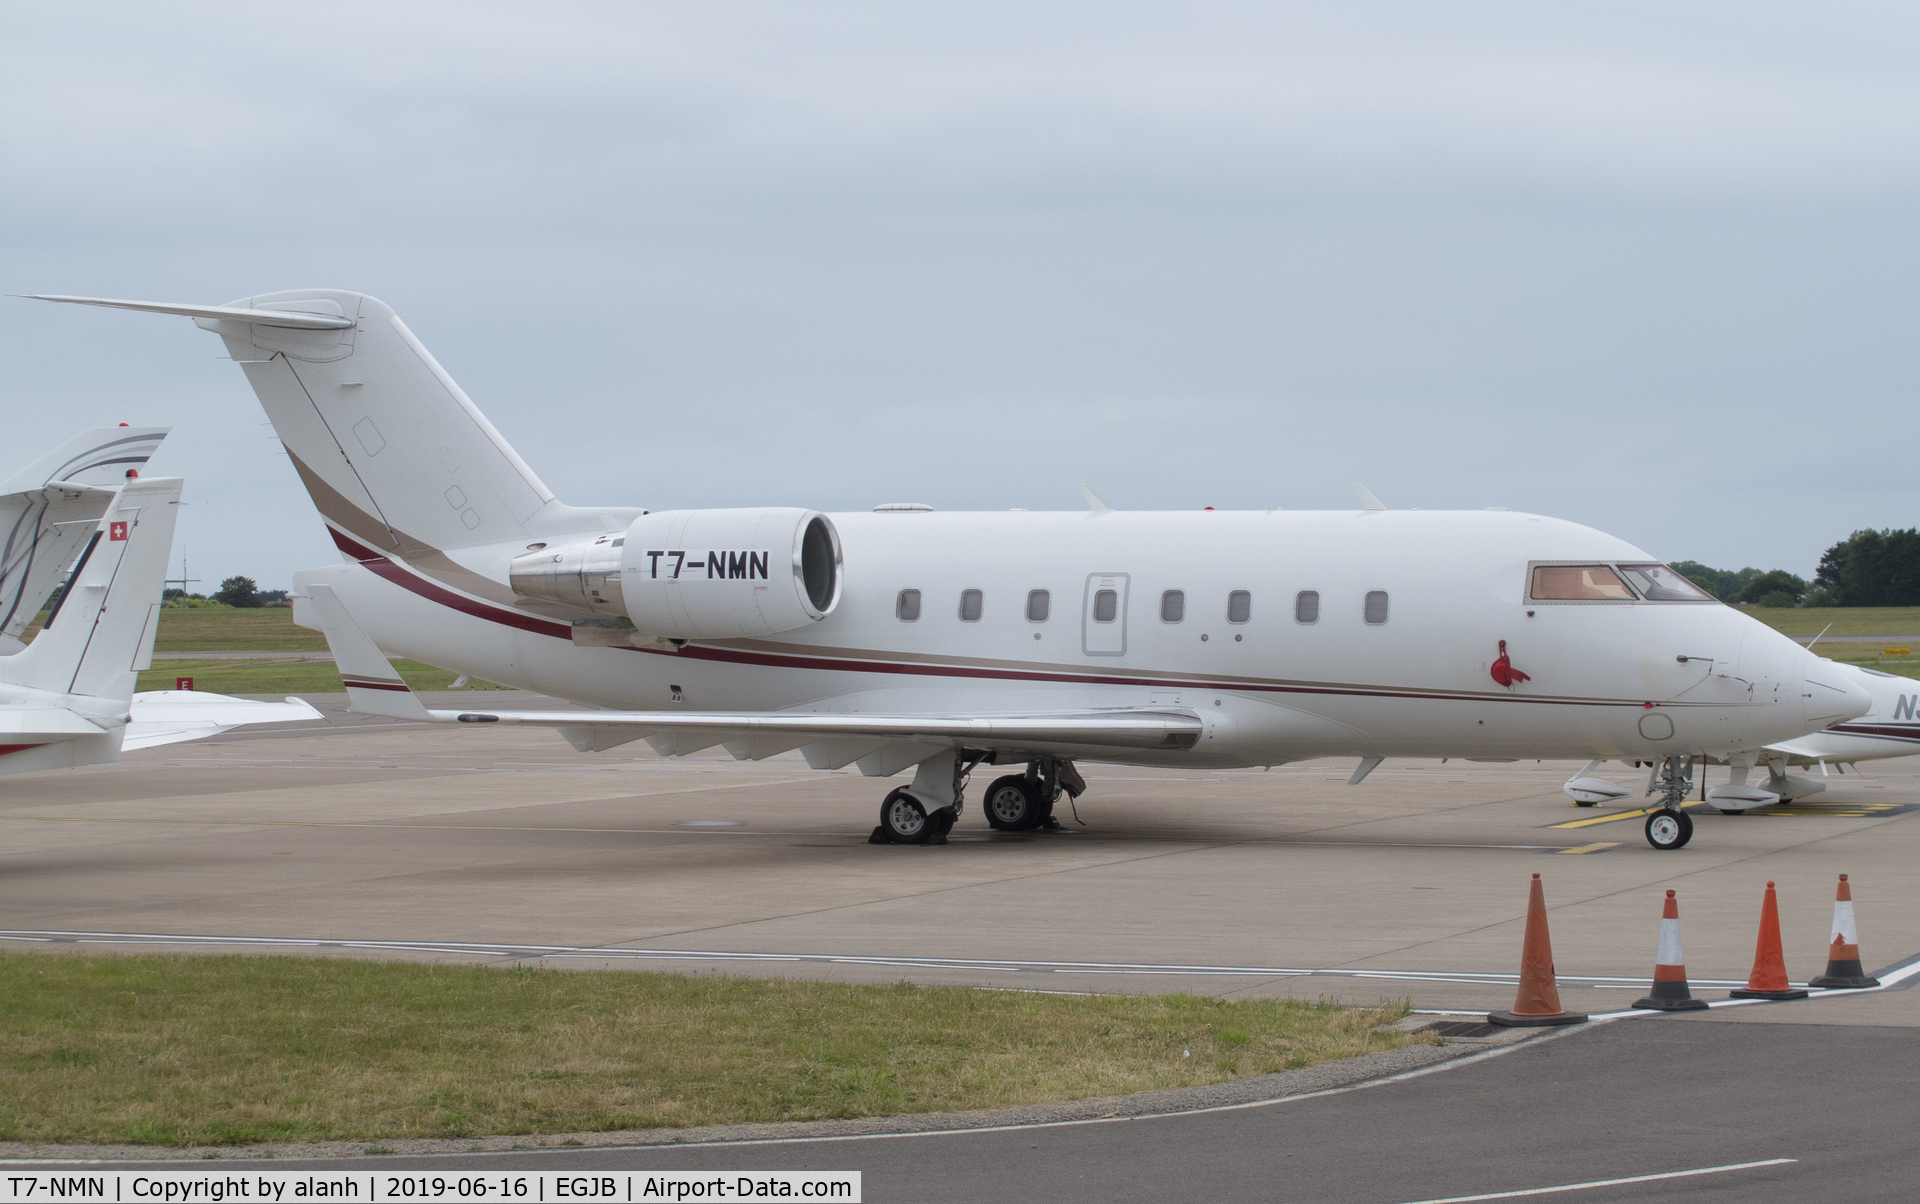 T7-NMN, 2005 Bombardier Challenger 604 (CL-600-2B16) C/N 5599, Parked at ASG, Guernsey following reg change